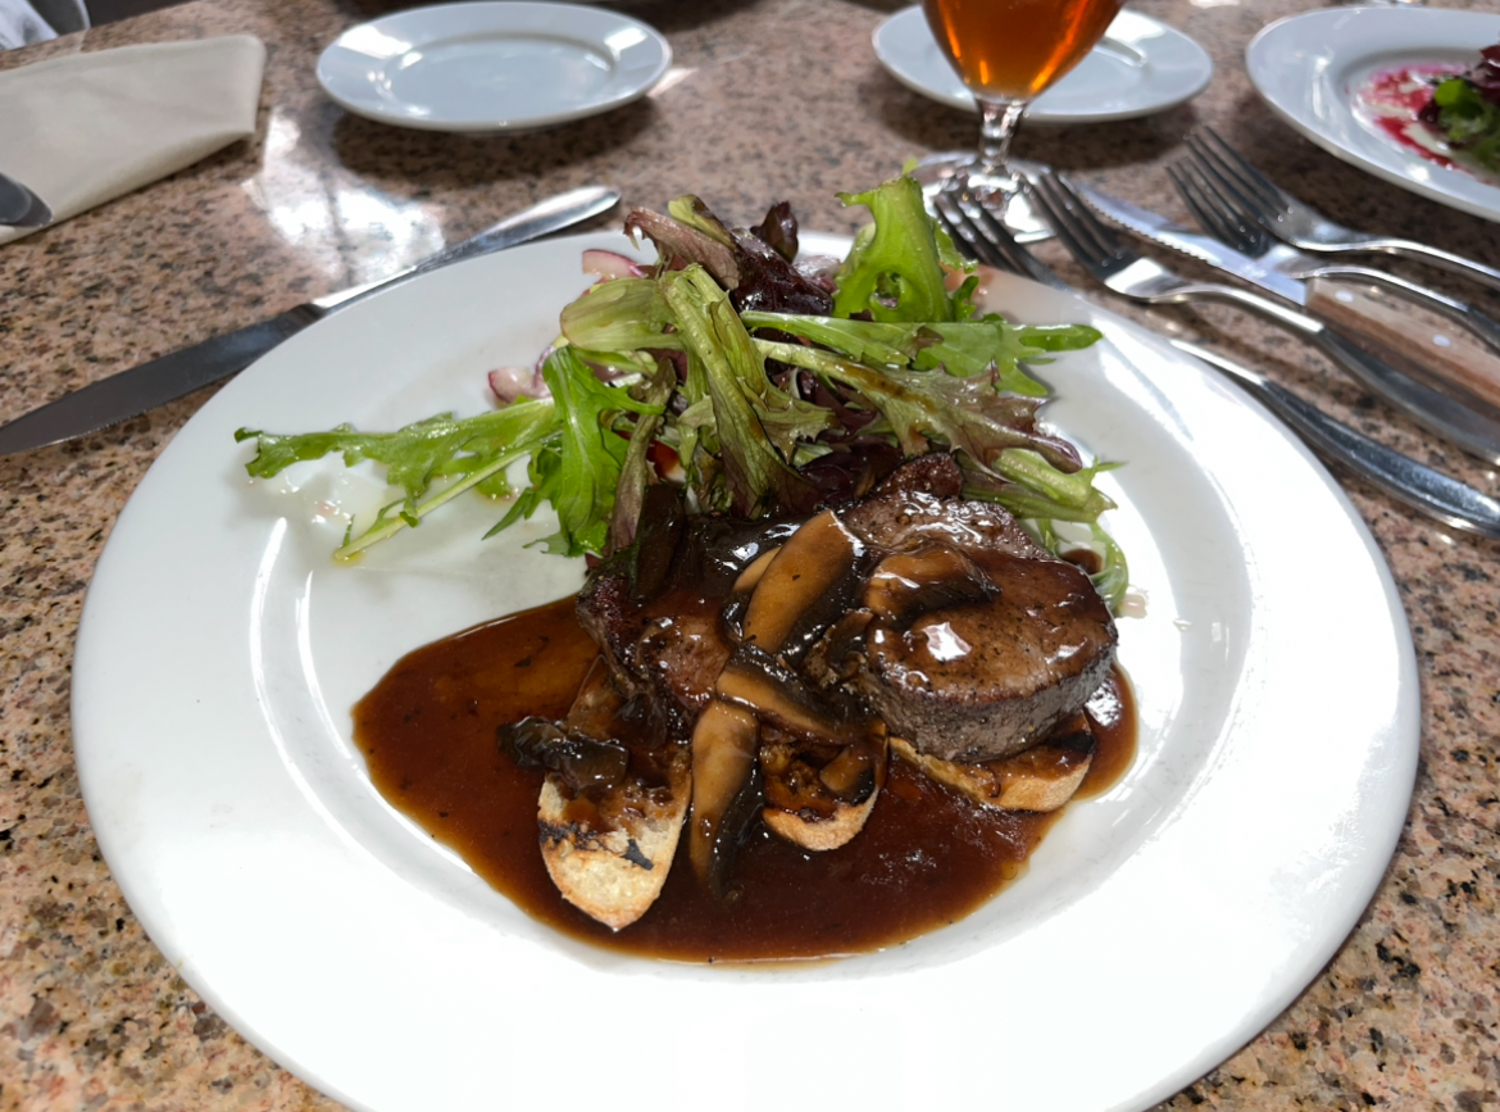 A piece of steak accompanied with sides sits on a table on Tuesday, May 9 at Petit Valentein located in Santa Barbara, Calif. The steak was served with a mushroom crostini and a side salad consisting of lettuce, onion, fresh tomato and a drizzle of olive oil.